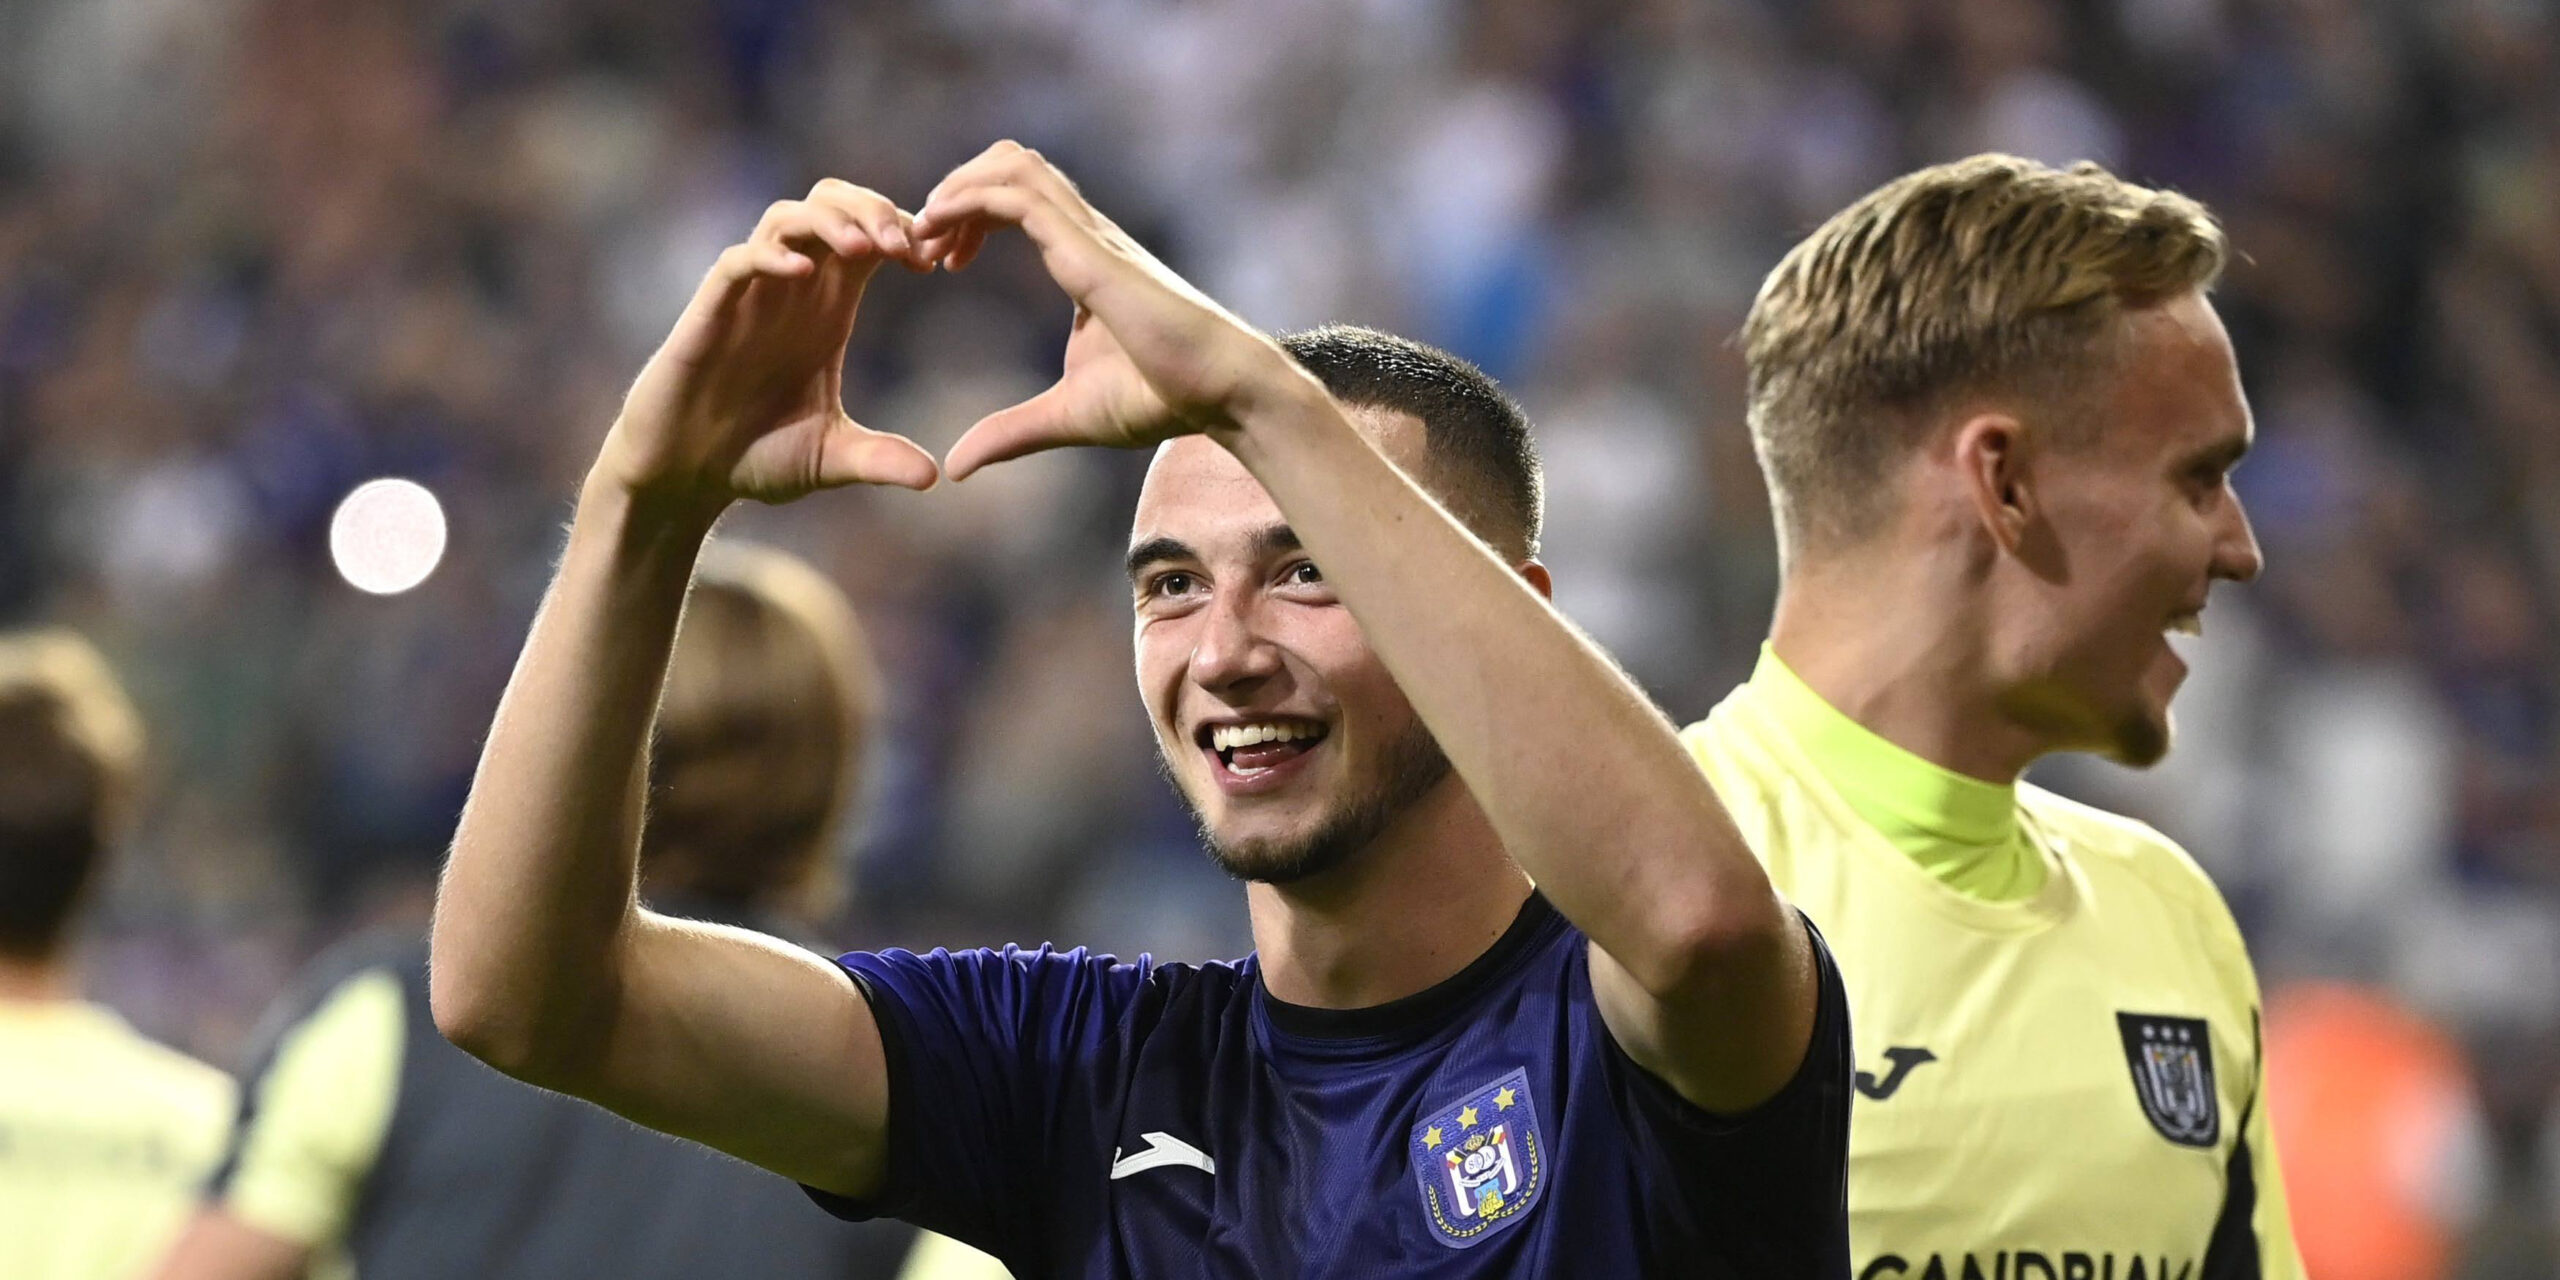 Earlier in the week, an Inter scout attended Anderlecht play Antwerp in the Jupiler Pro League to watch one particular player – Zeno Debast.